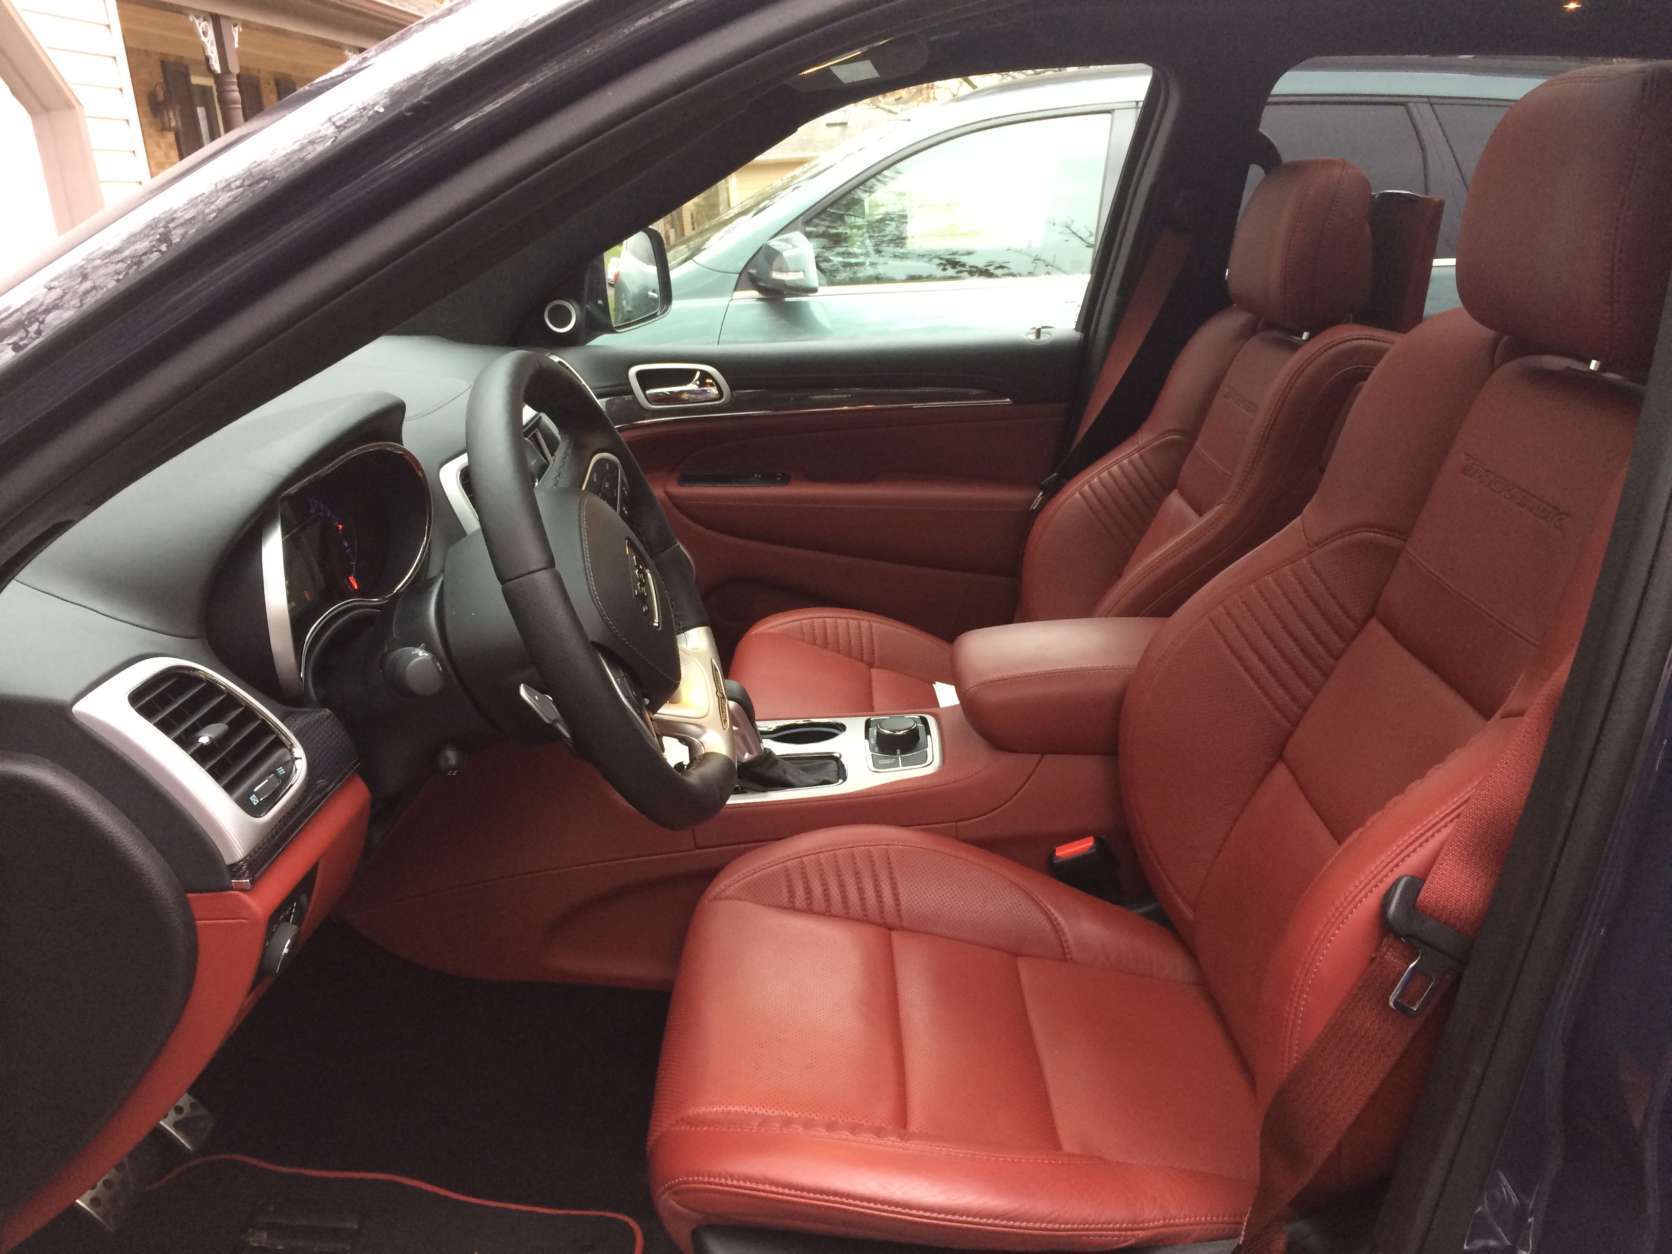 The Grand Cherokee is available for around $87,000 and it comes with a nicely equipped interior. The fully-loaded tester Parris chose came with a Signature Leather wrapped interior that really makes a jump in luxury. (WTOP/Mike Parris) 